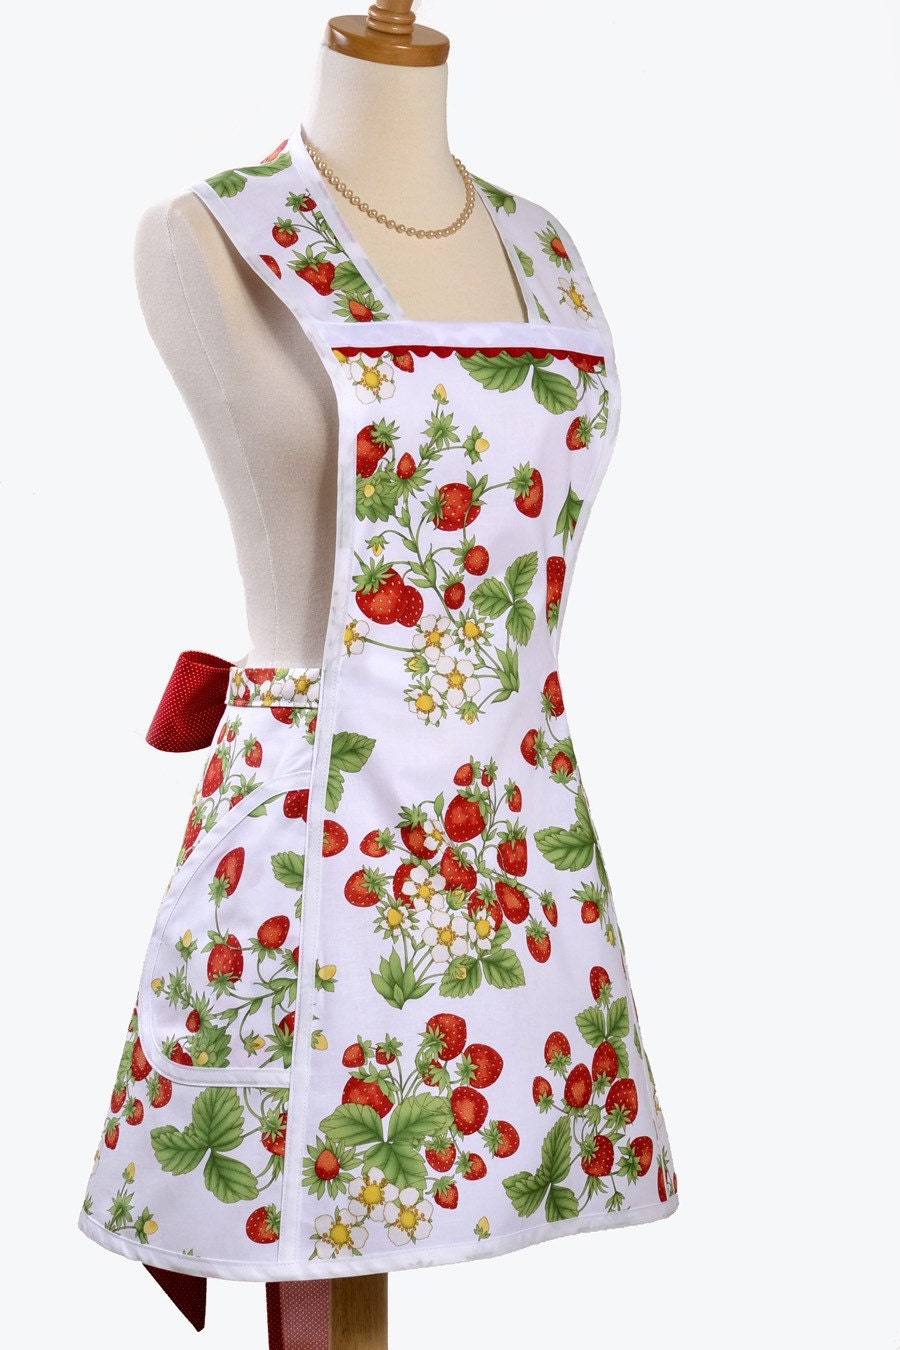 Womens Vintage Inspired Retro Style Apron - Red Strawberries in Fresh Spring White Background